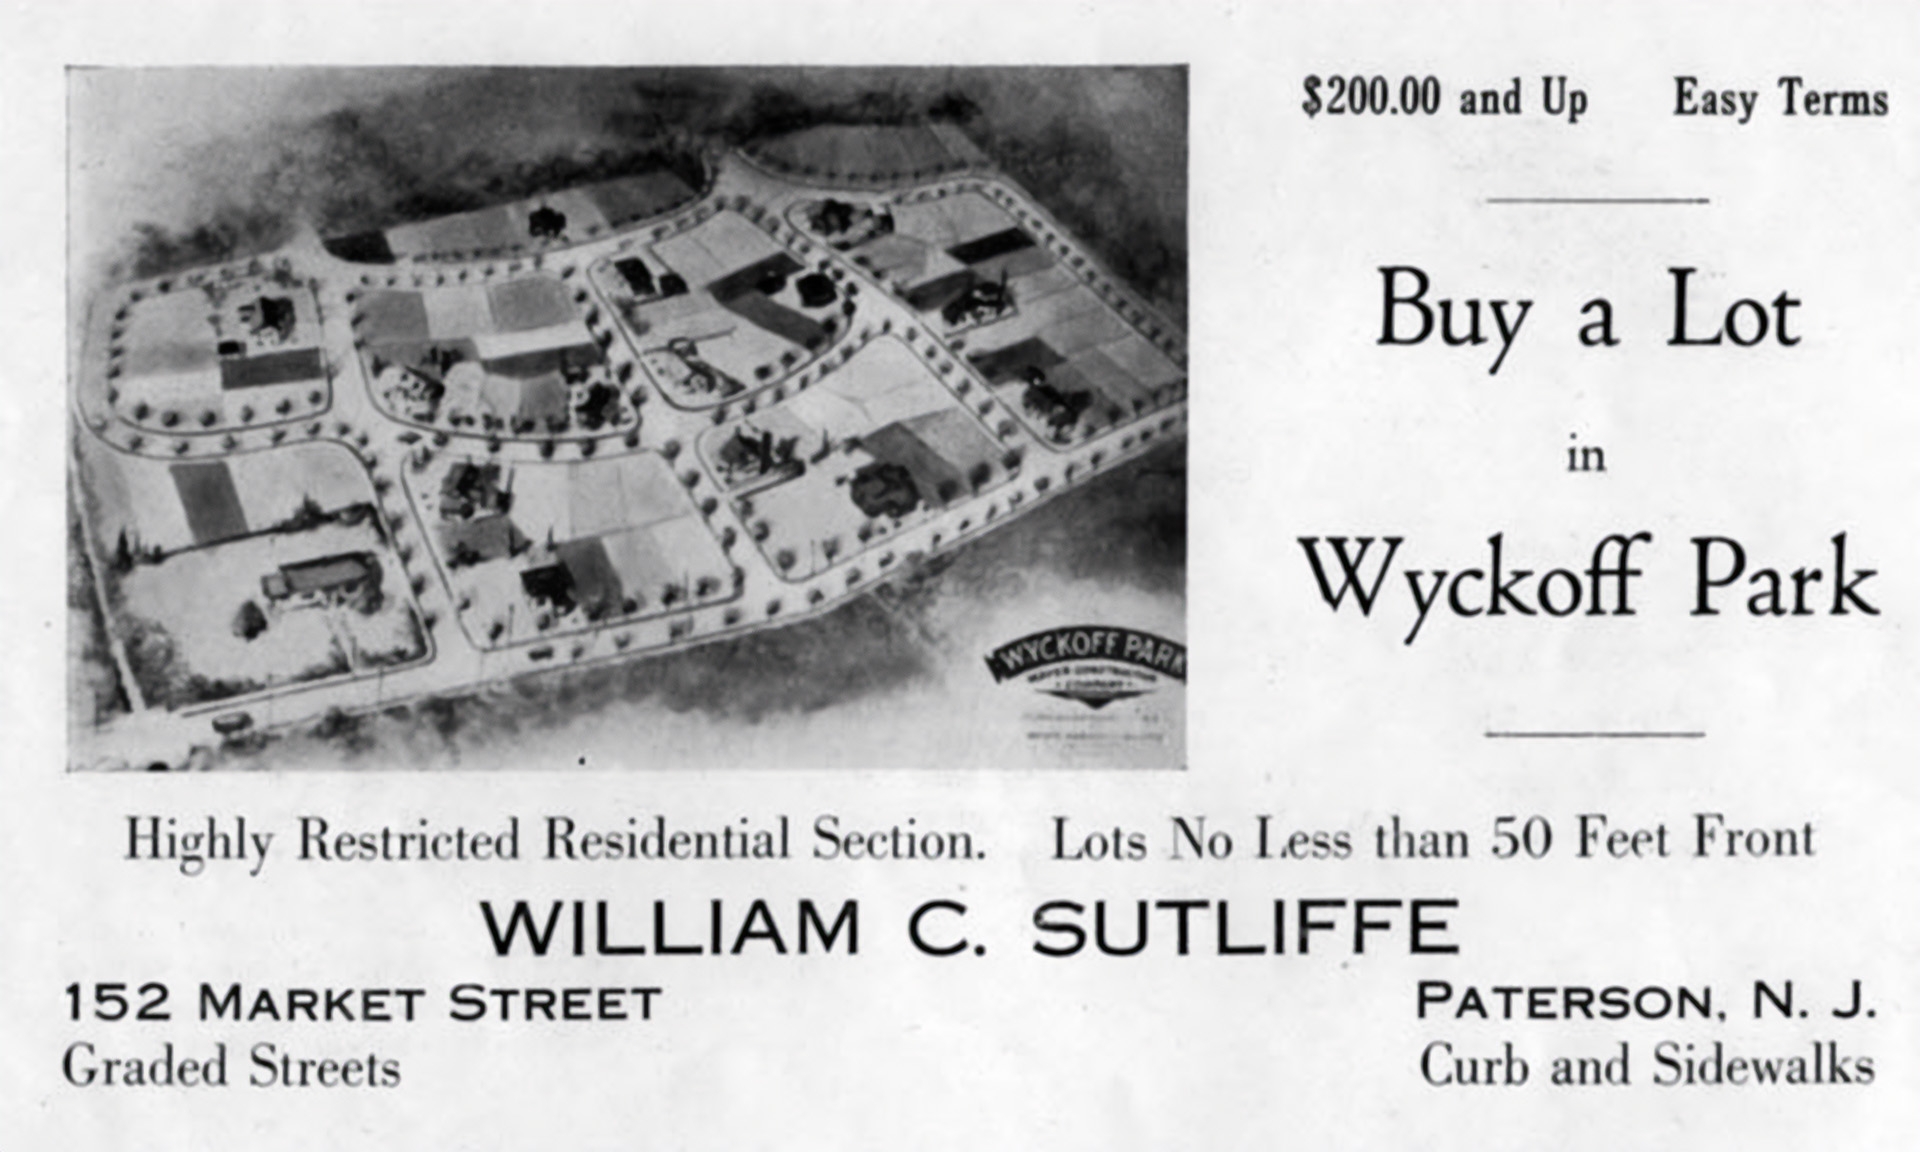 This advertisement from 1923 is one of several plans to develop Wyckoff Housing. The most famous was the acquisition of the triangle of land by Main Street, Wyckoff Avenue, and Franklin Avenue by Real Estate developer Cornelius Vreeland in 1870, after the railroad reached town. He laid out streets and building lots, but only a few homes were built, including his own on Clinton Avenue.